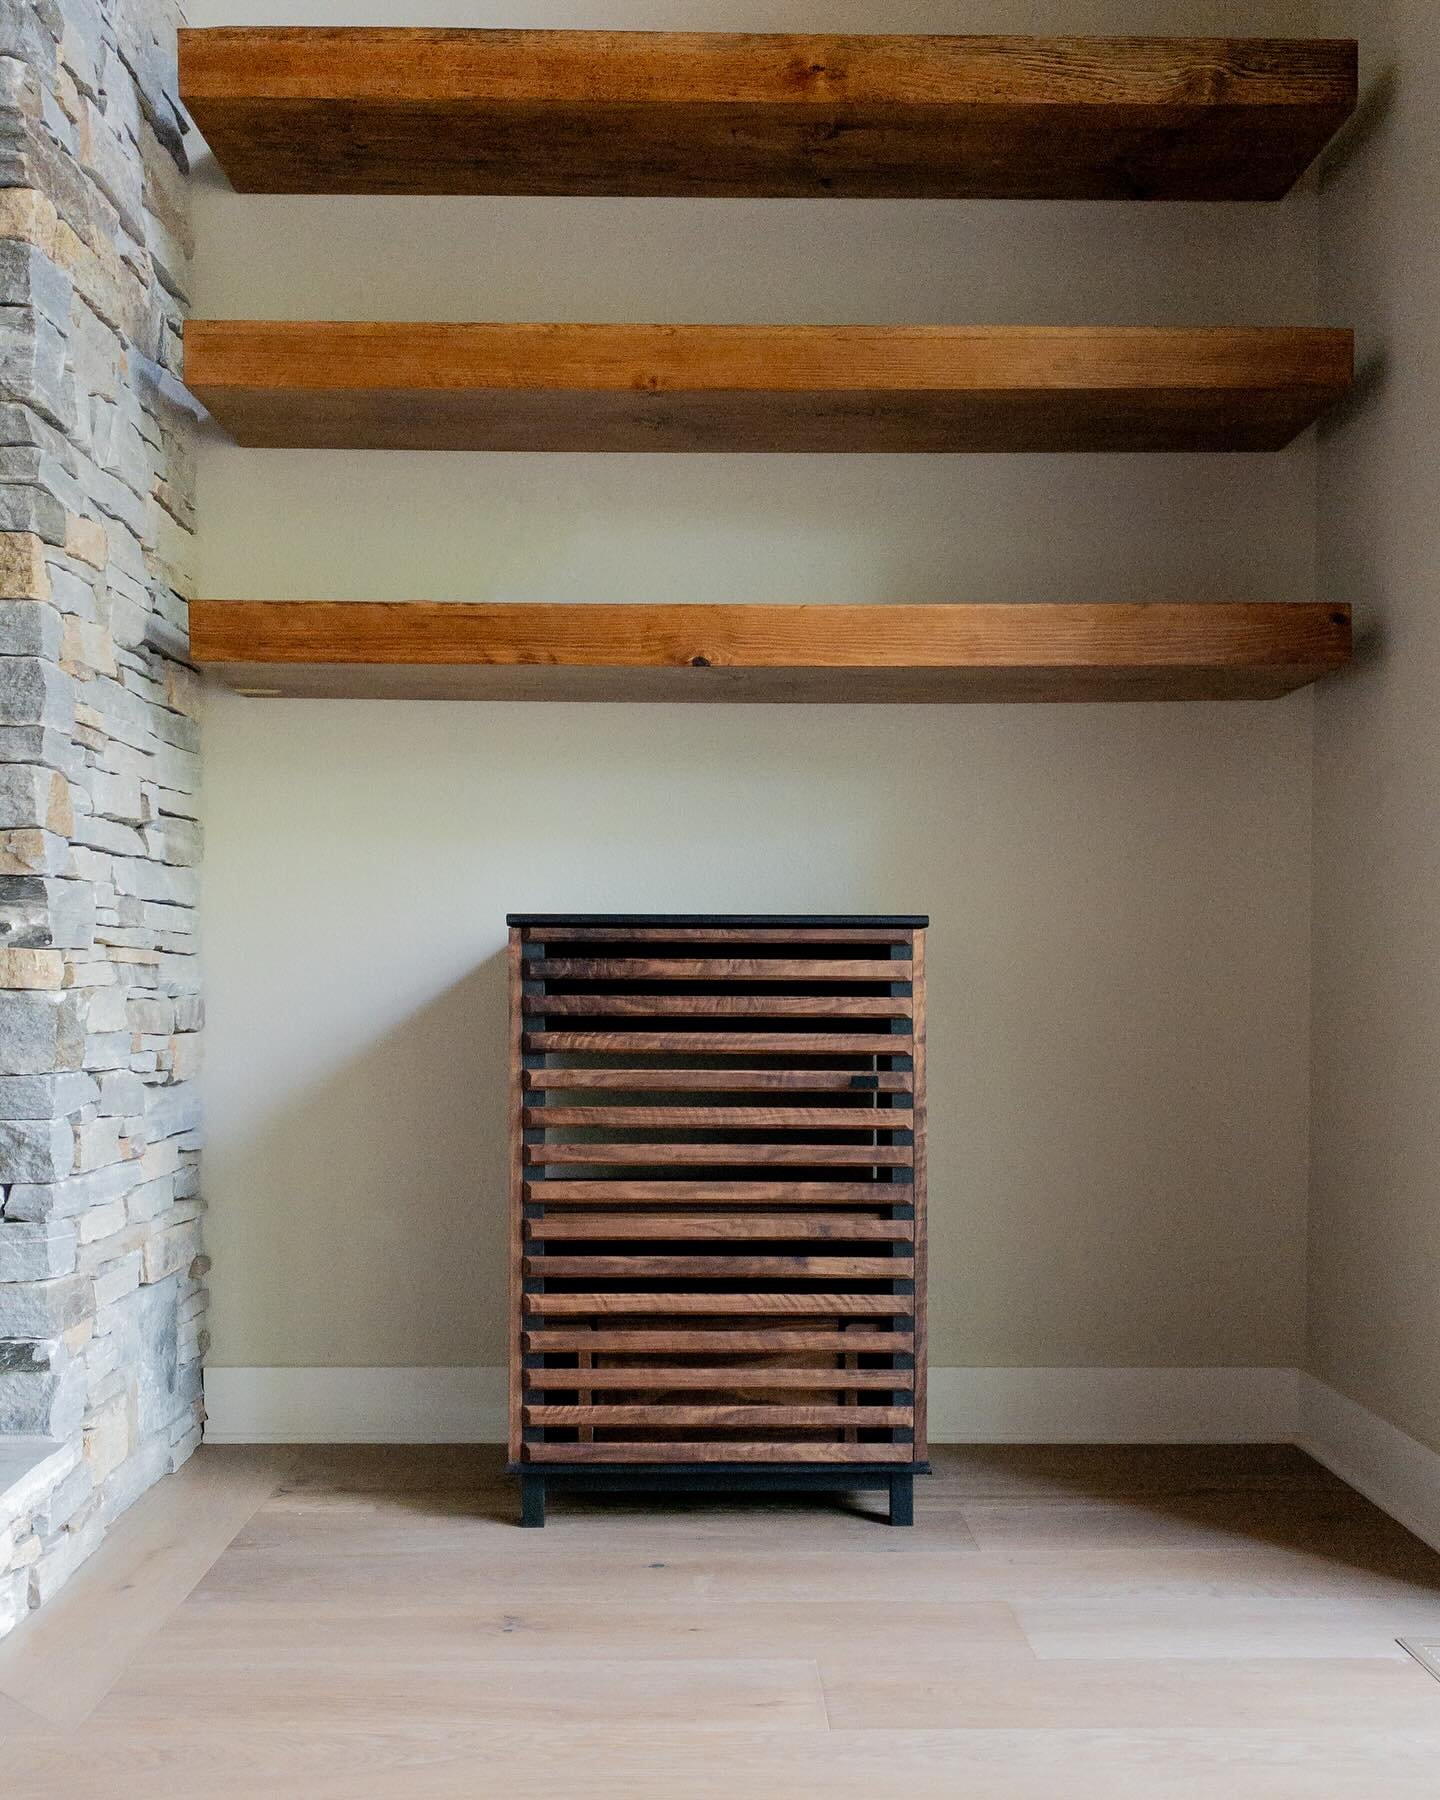 Recently delivered this bespoke audio cabinet to a wonderful client in Waynesville for their brand new forever home!

With this piece we wanted to pack in as much functionality as possible into a small footprint and draw from the custom home&rsquo;s 